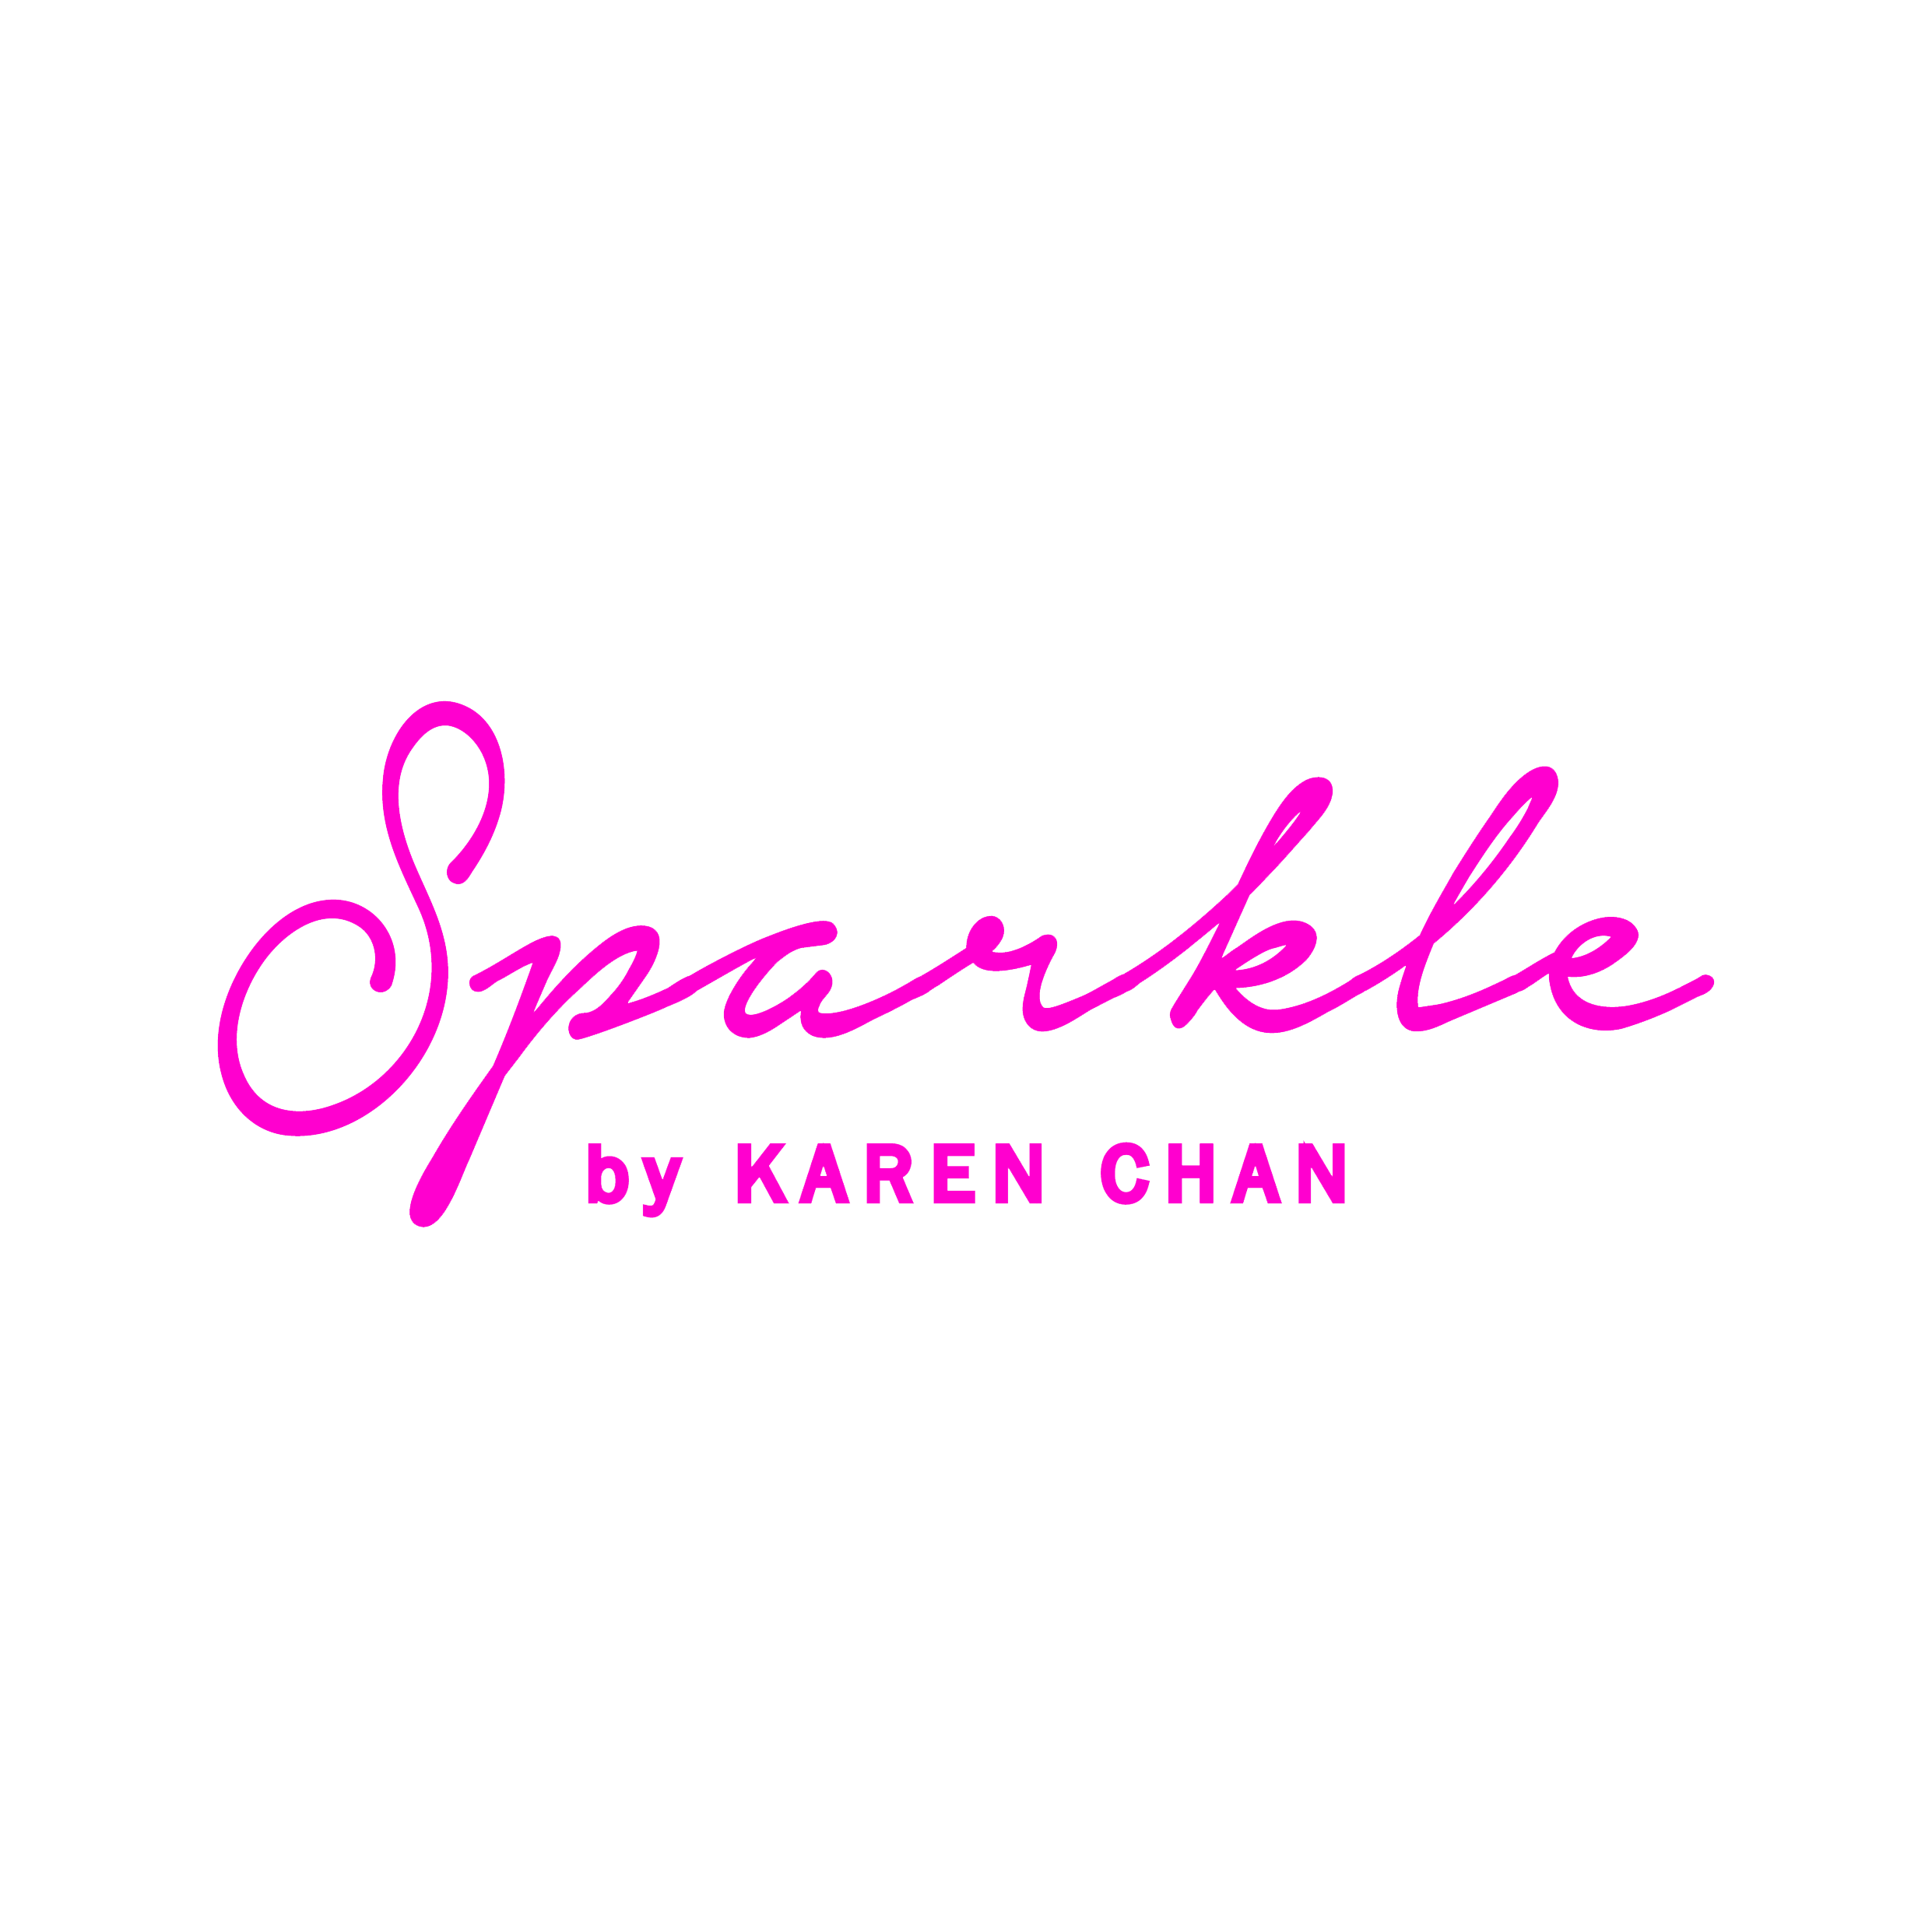 Sparkle Collection